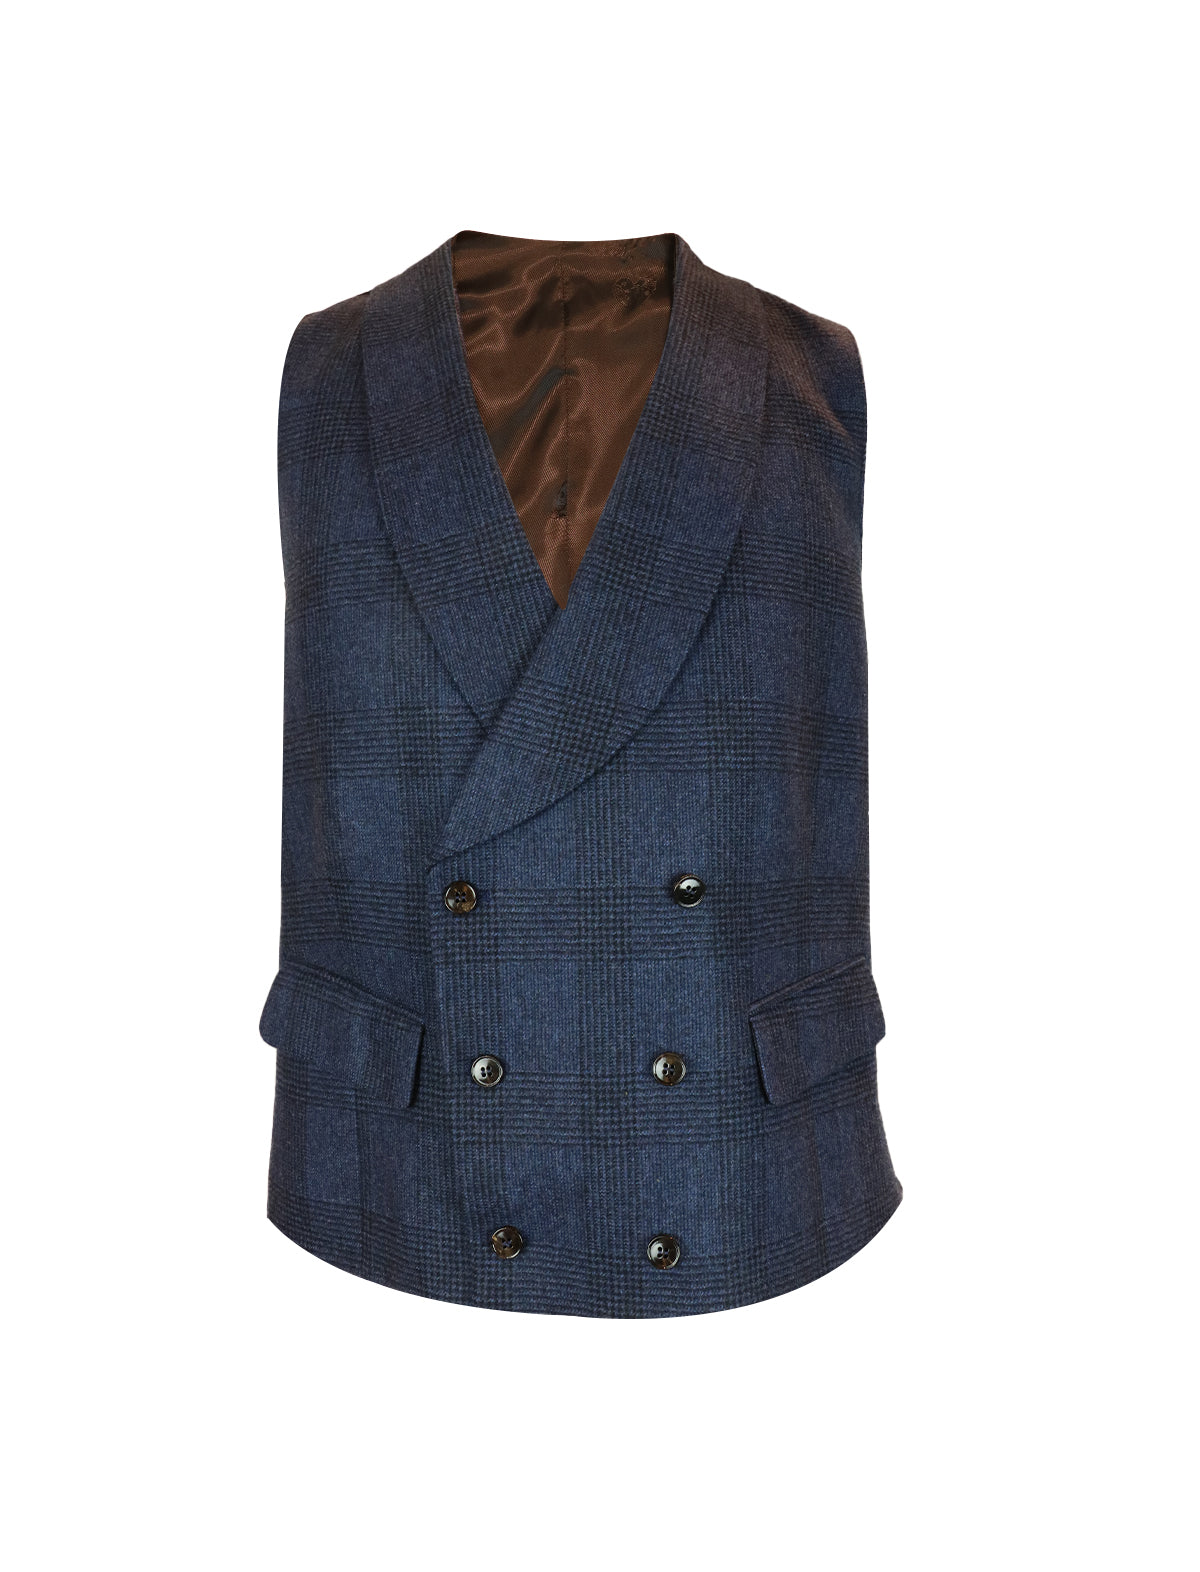 GABRIELE PASINI Double-Breasted Vest in Navy